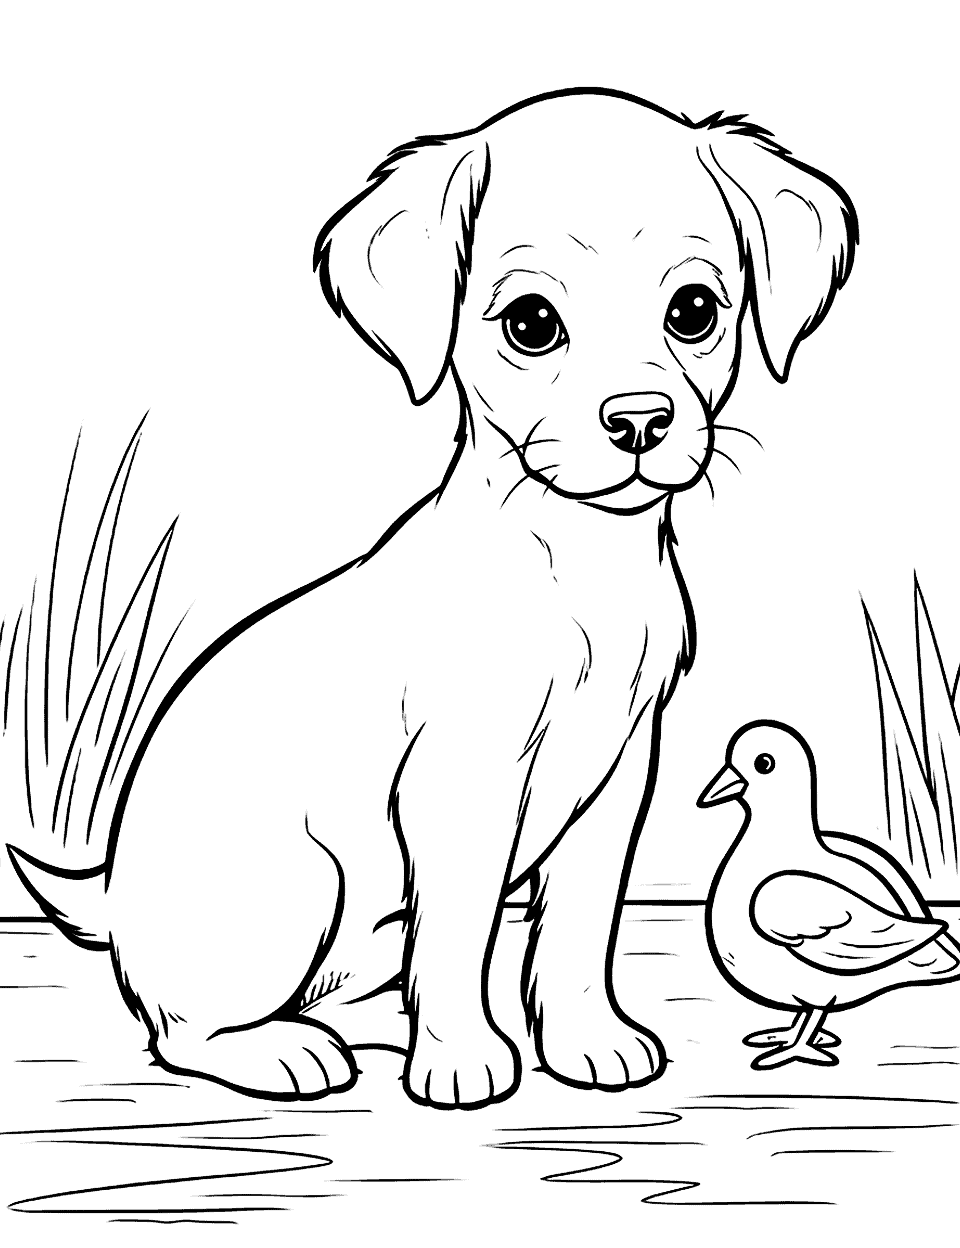 Cute Interaction Puppy Meeting a Duckling Coloring Page - A coloring sheet of a puppy curiously interacting with a duckling for the first time.